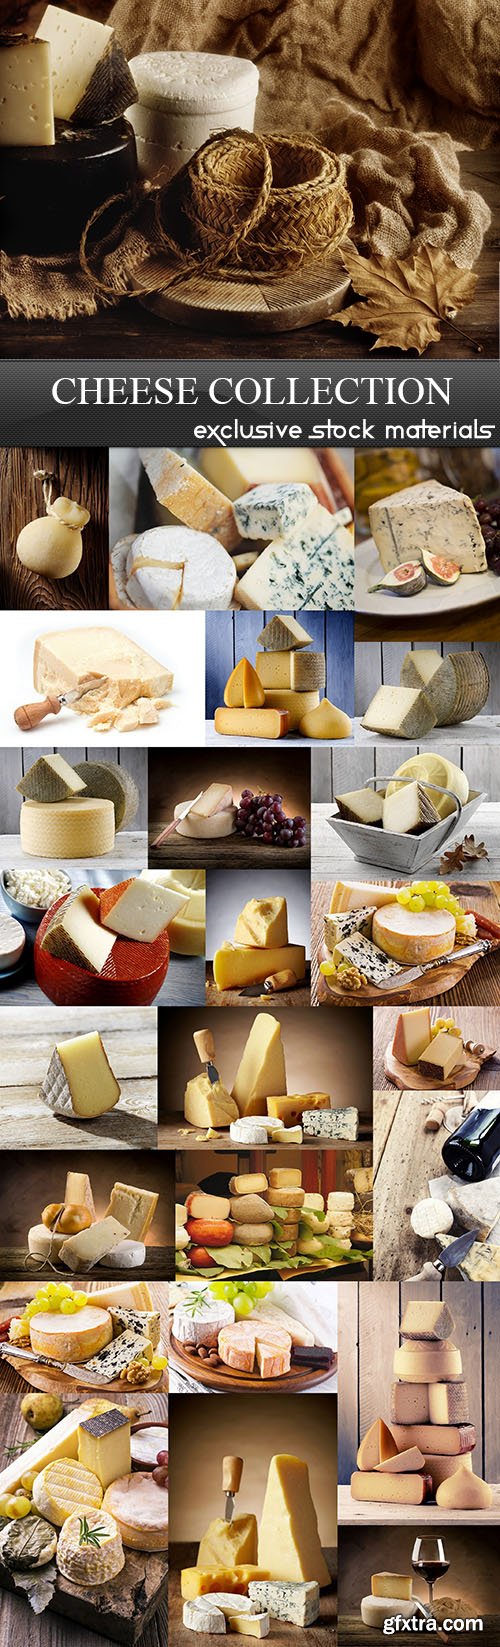 Cheese Compositions 25xJPG